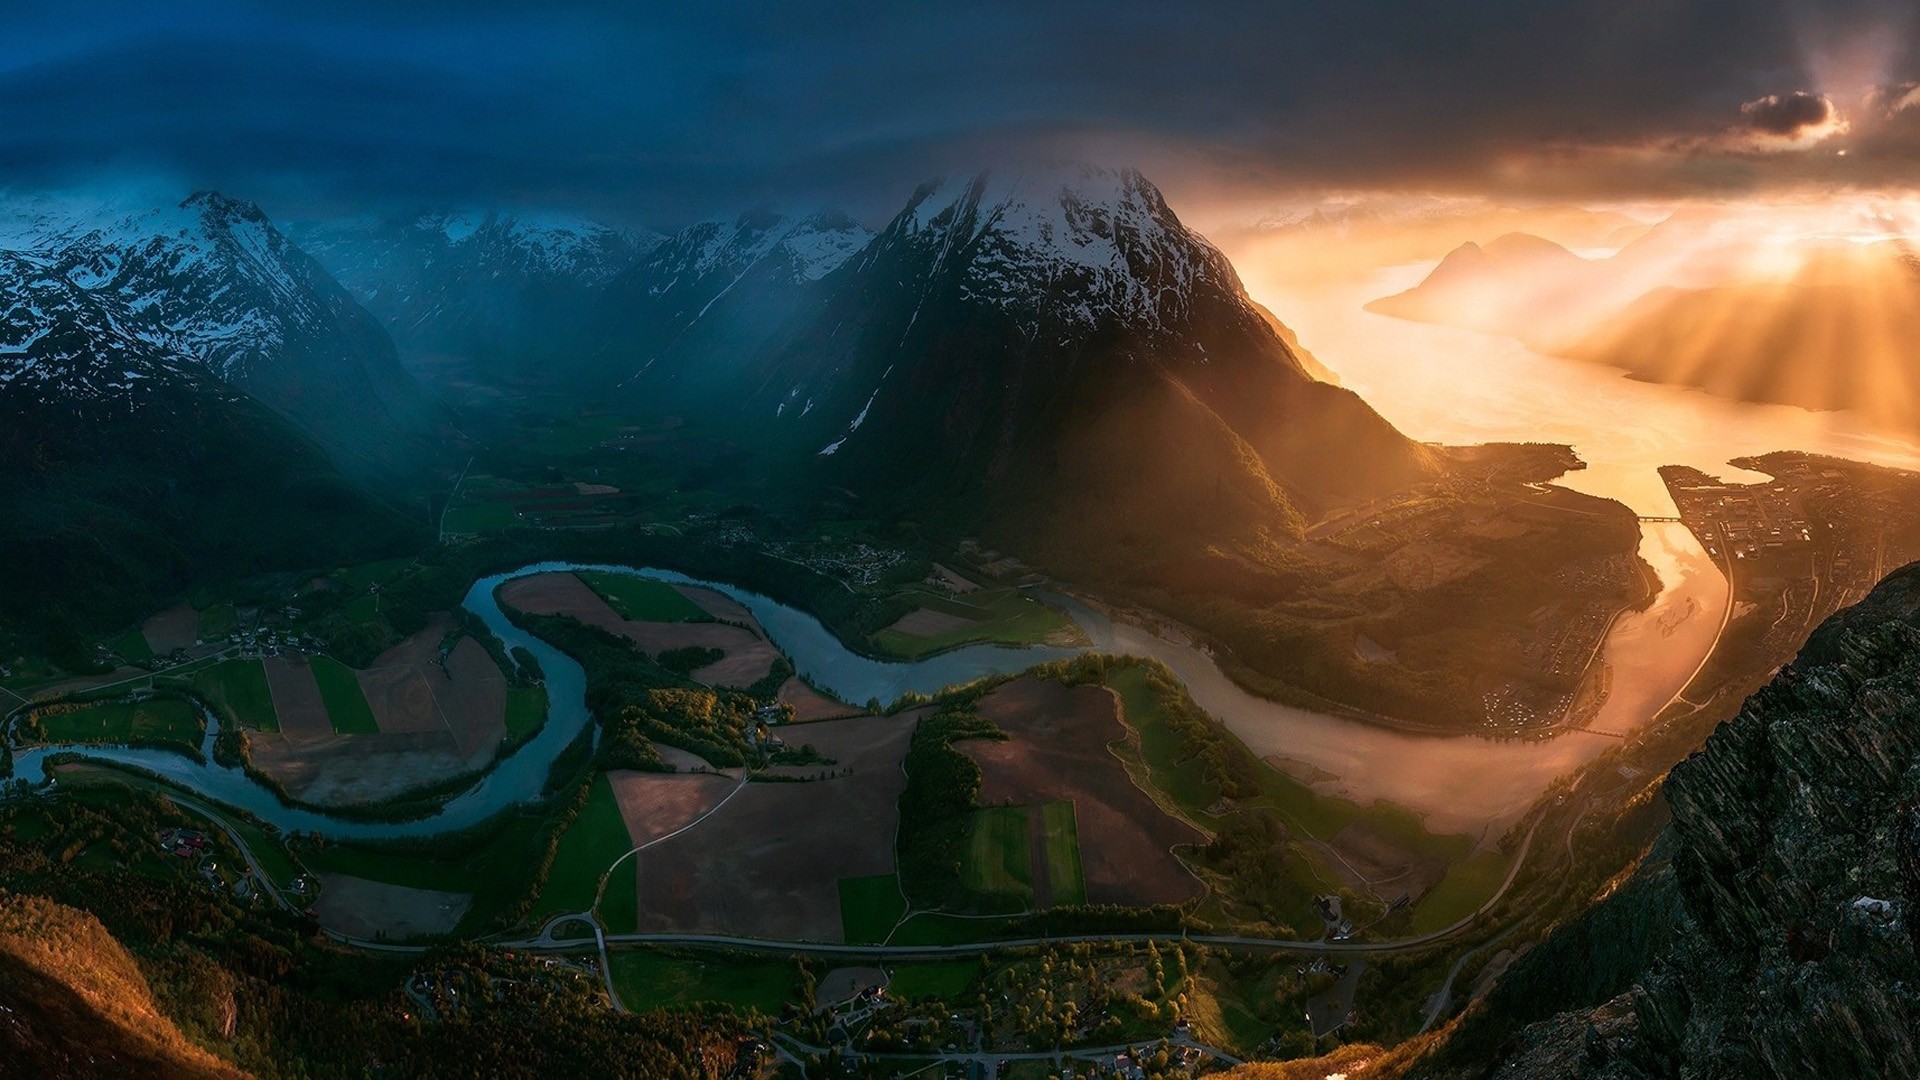 General 1920x1080 river landscape valley aerial view overcast sunset contrast sun rays 500px mountains snowy peak Max Rive Norway